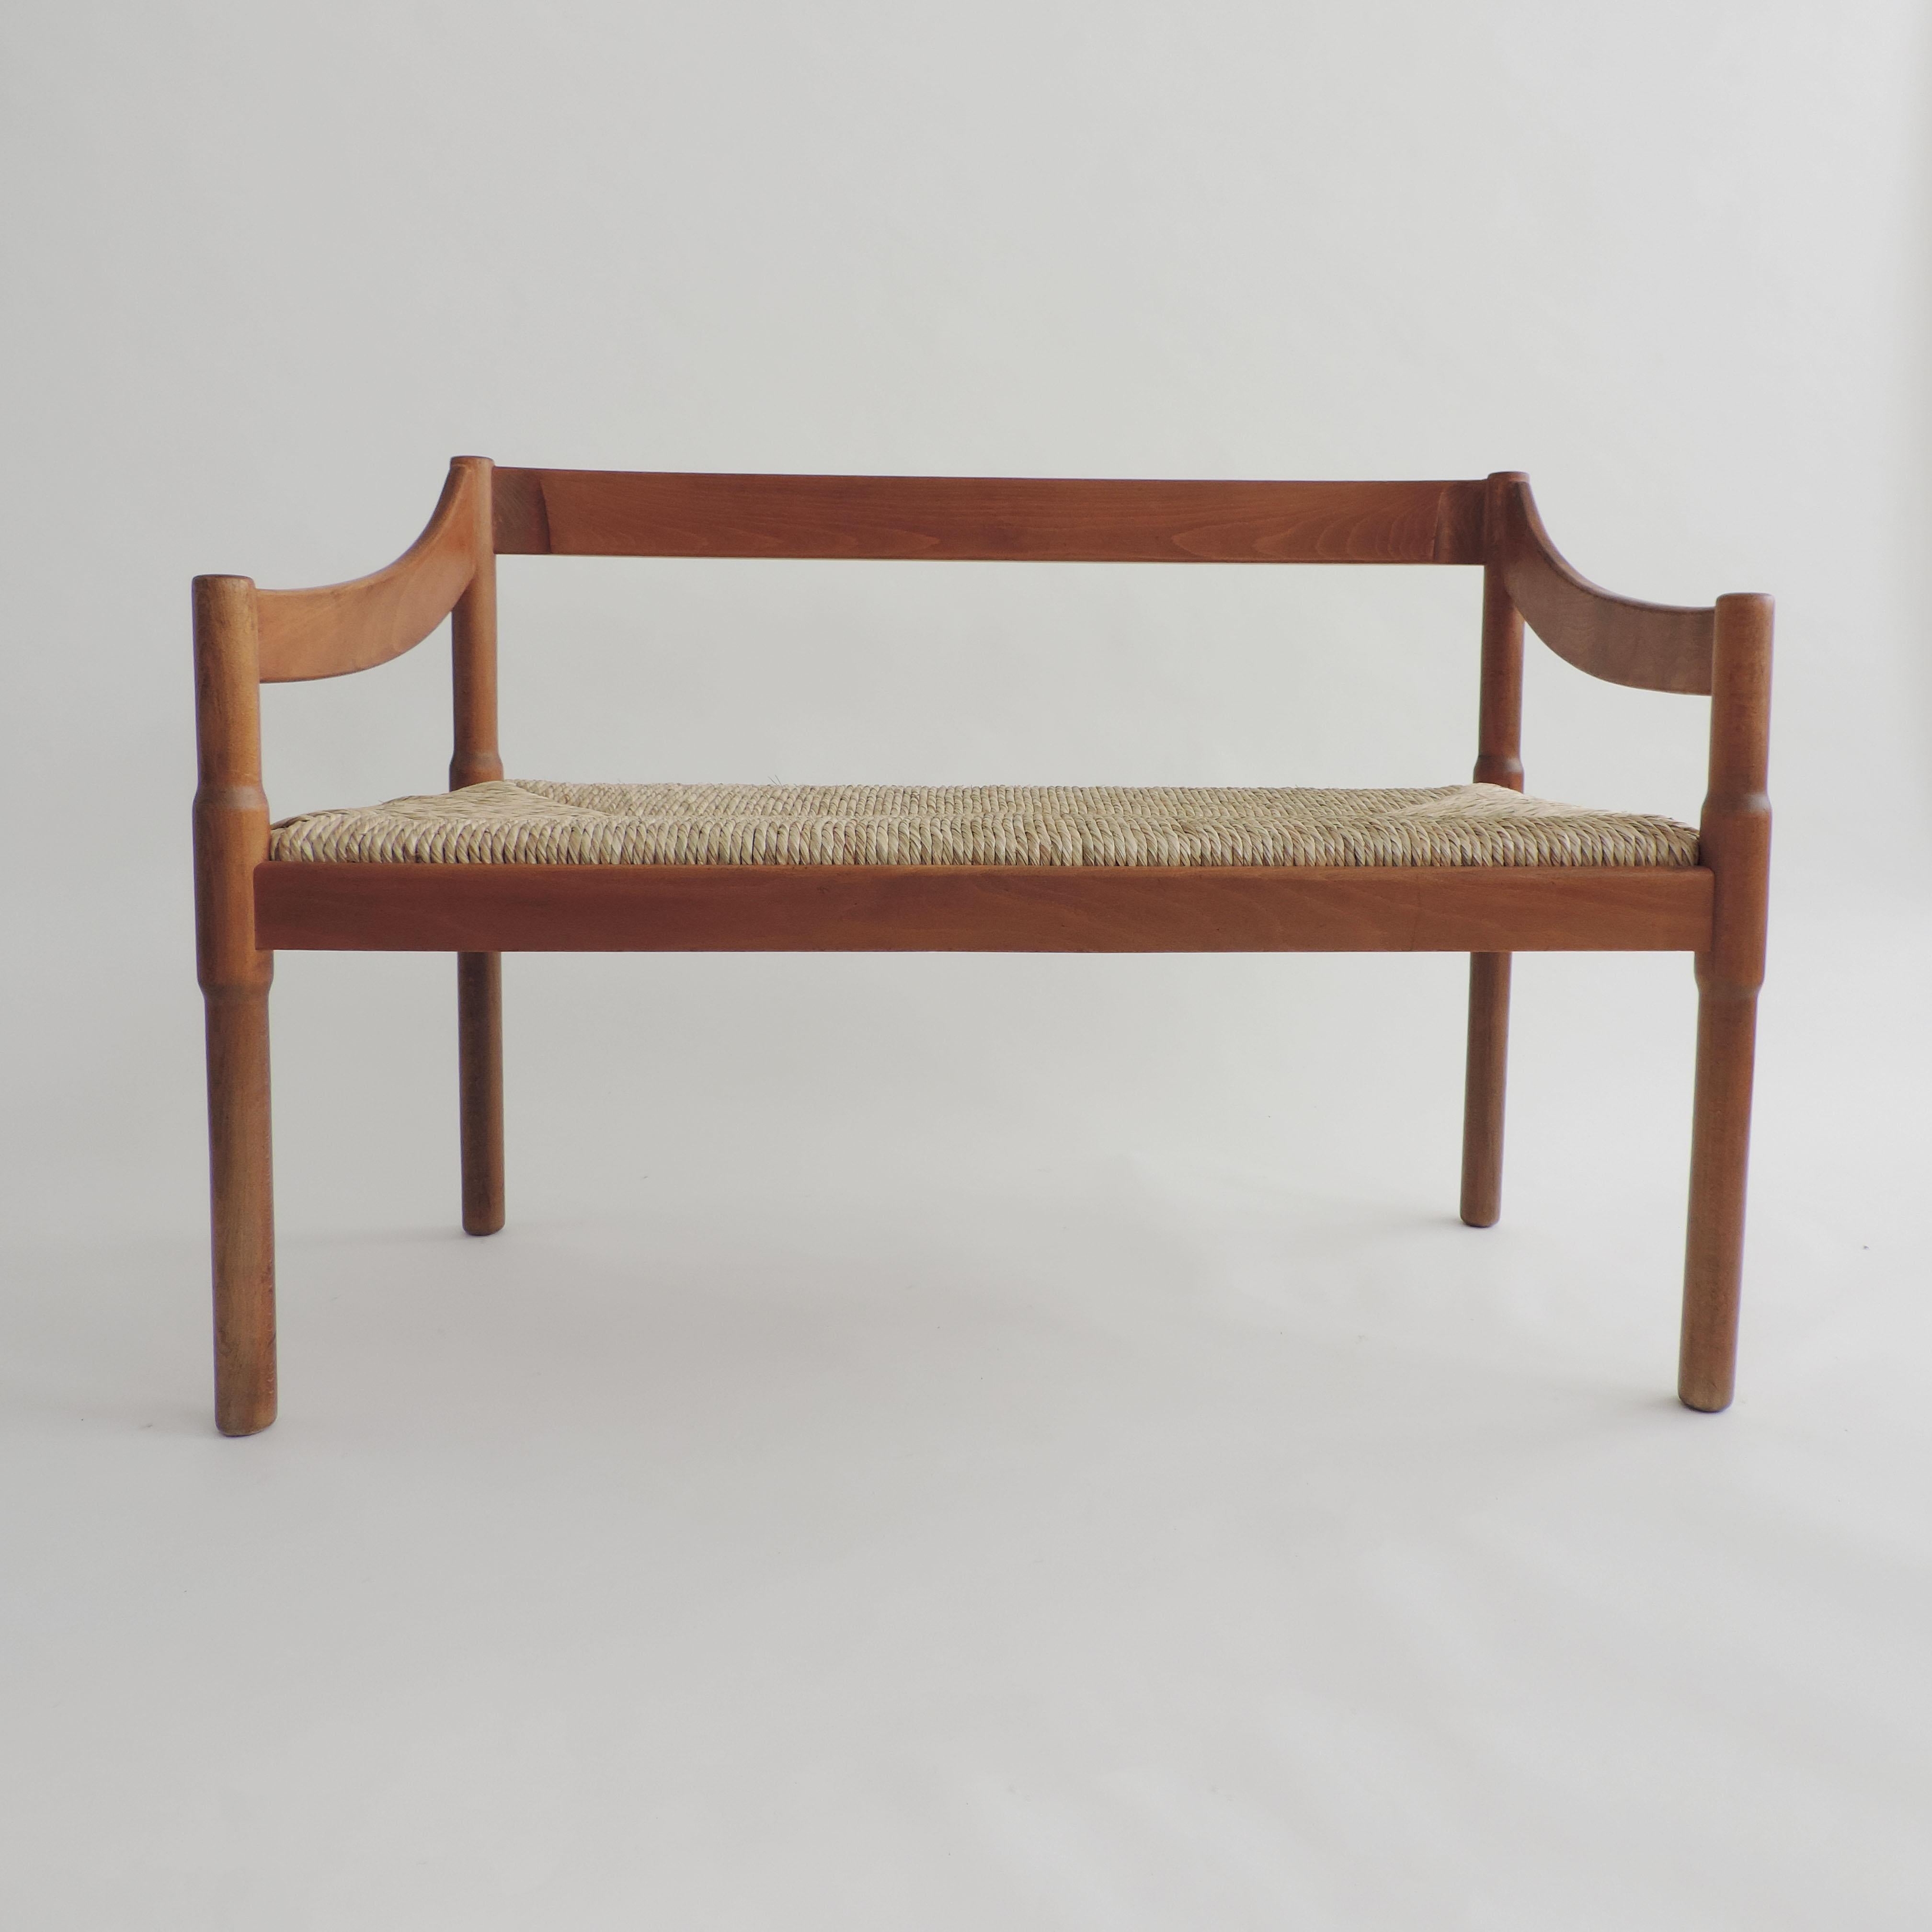 Mid-Century Modern Vico Magistretti Carimate Wood and Straw Seat Settee for Cassina, Italy 1960s